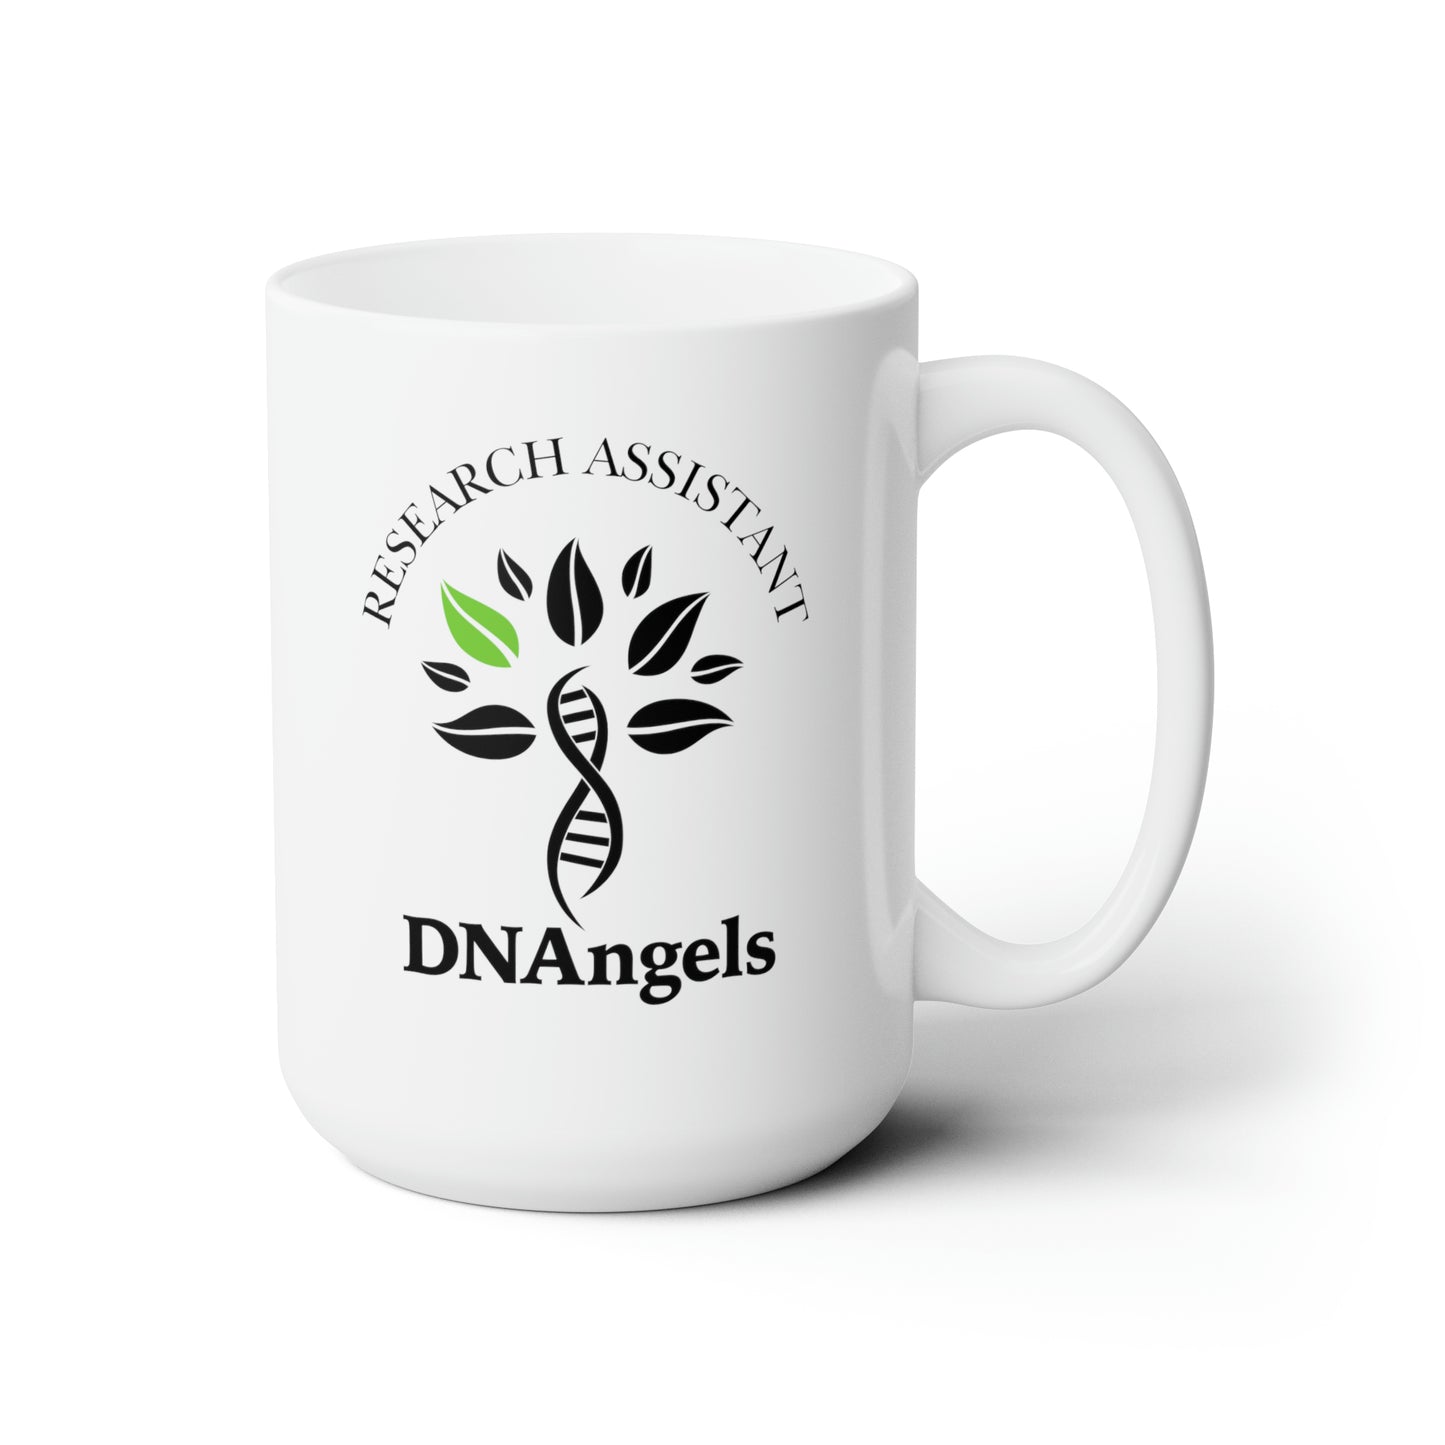 Research Assistant Mug